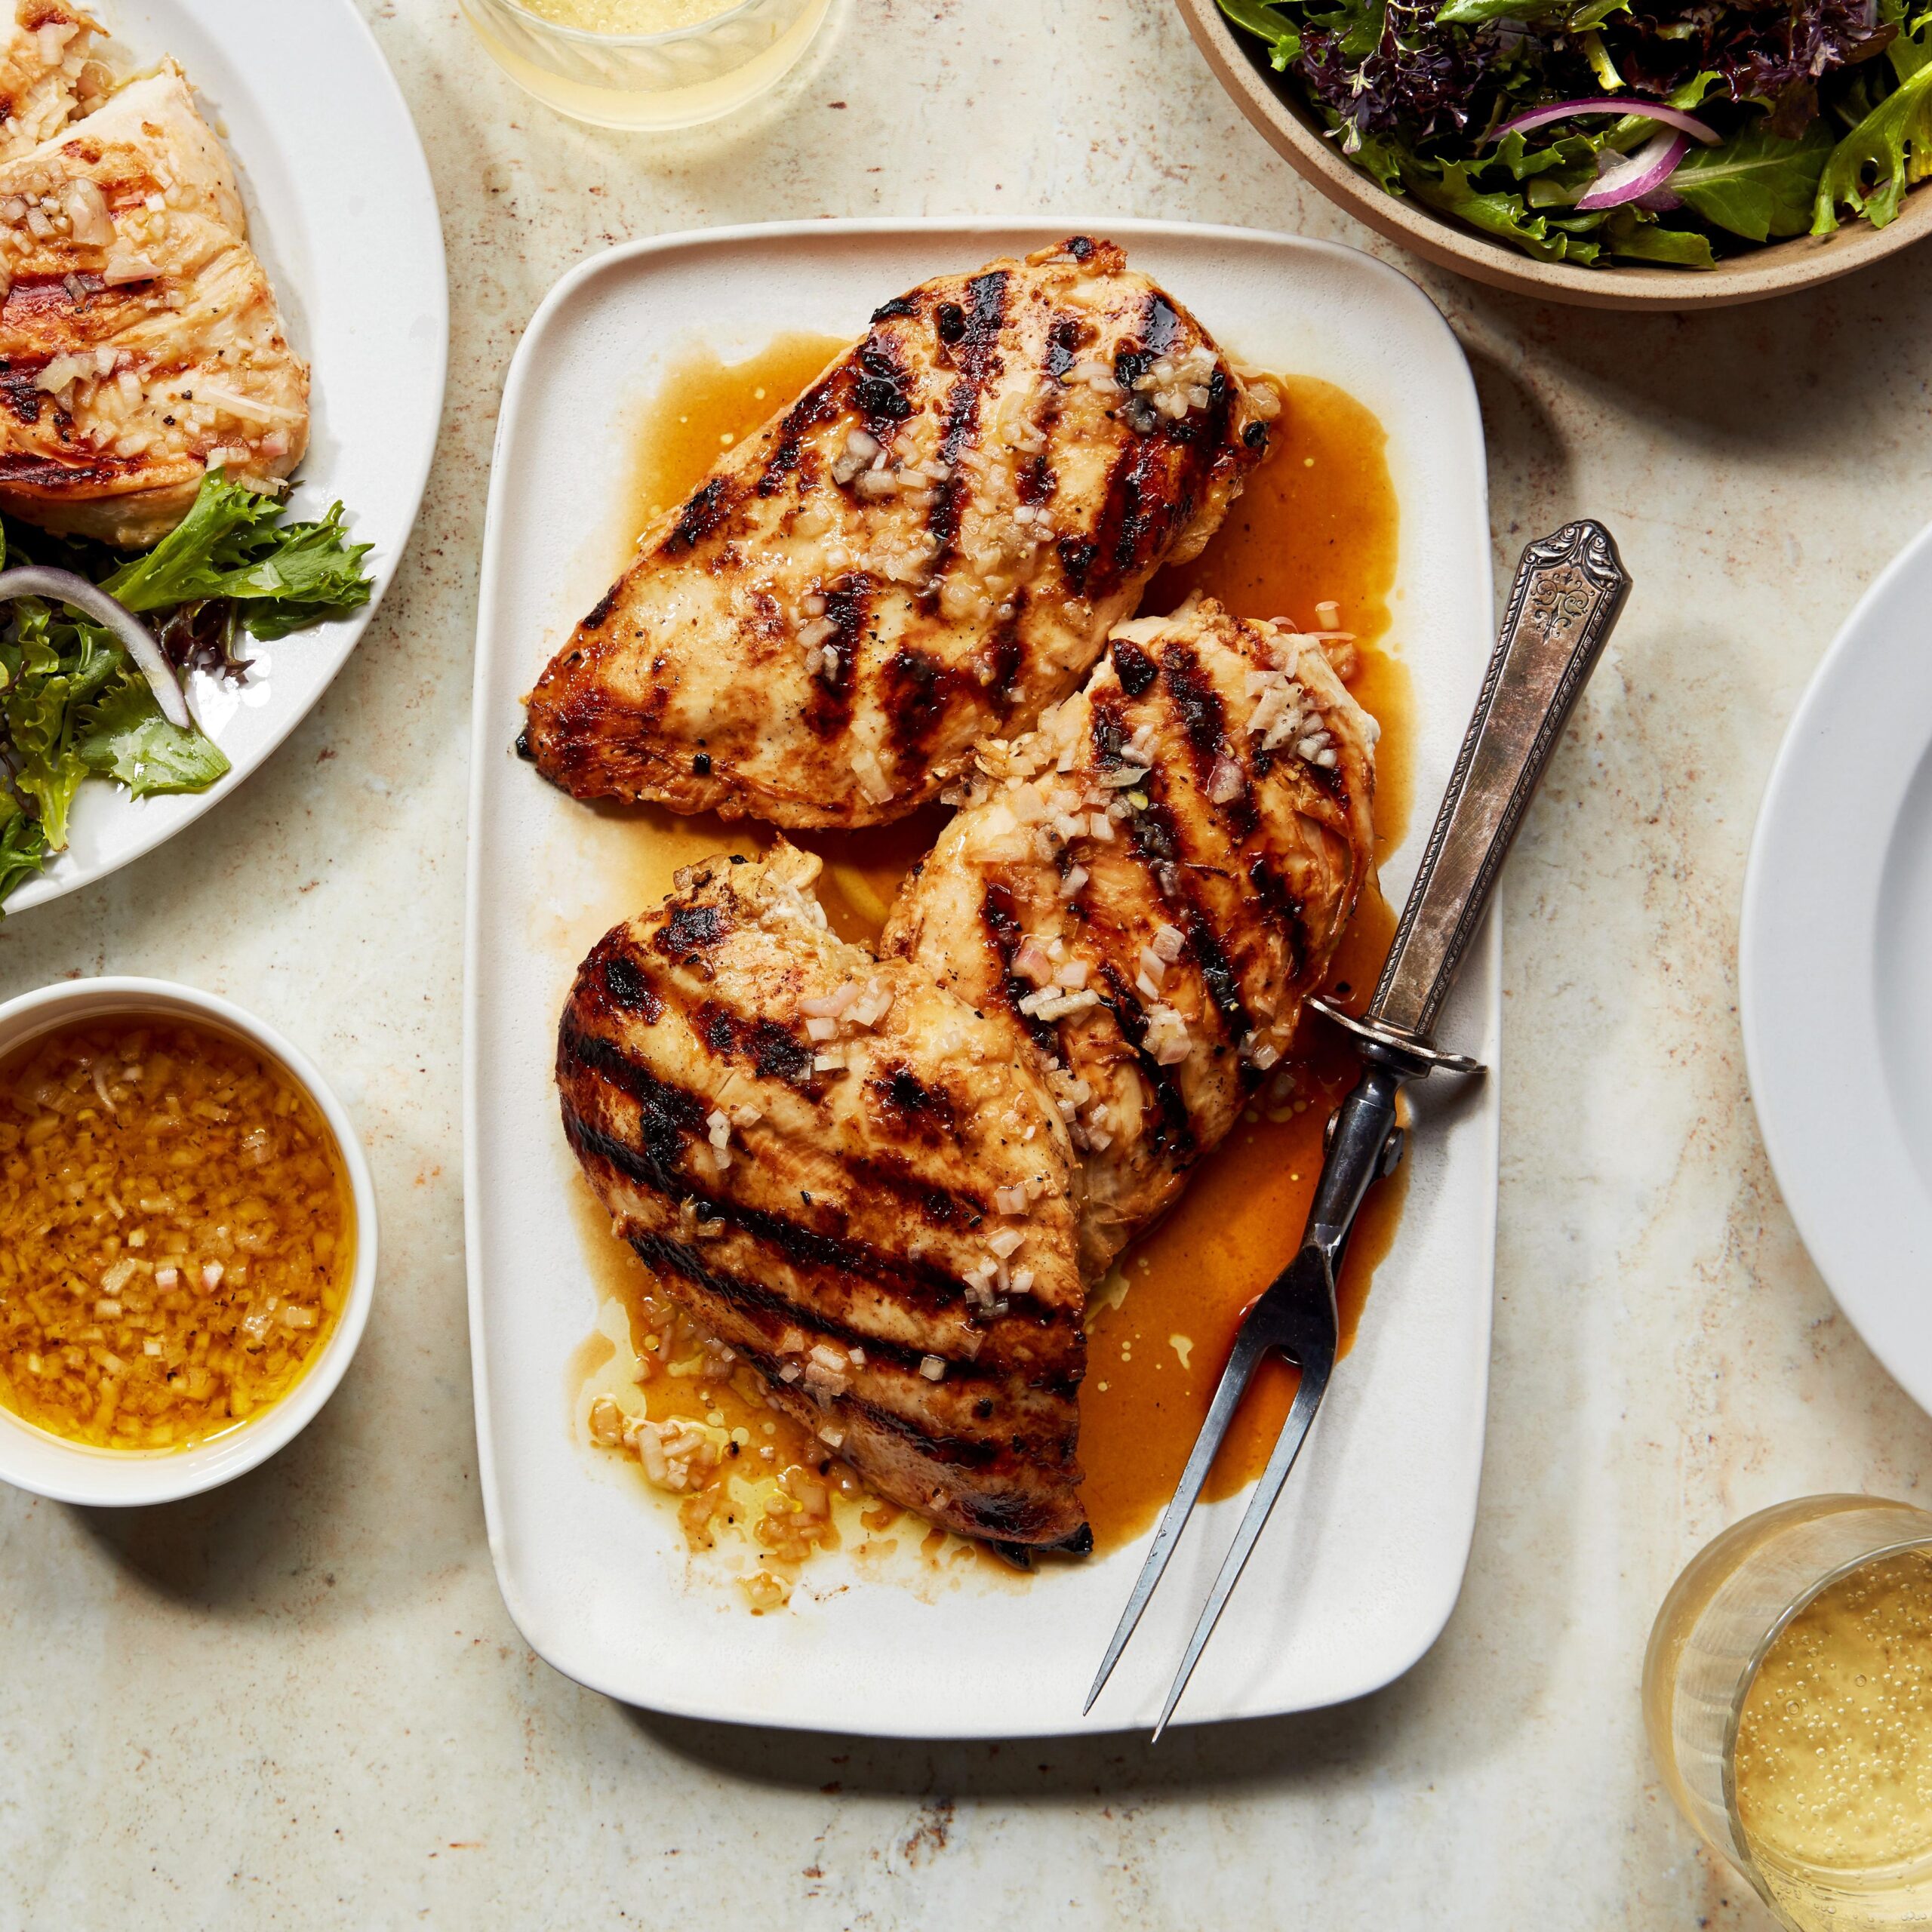  Embrace the aromas of the vineyard with a wine marinade that gives your grilled chicken the perfect balance of savory and sweet.